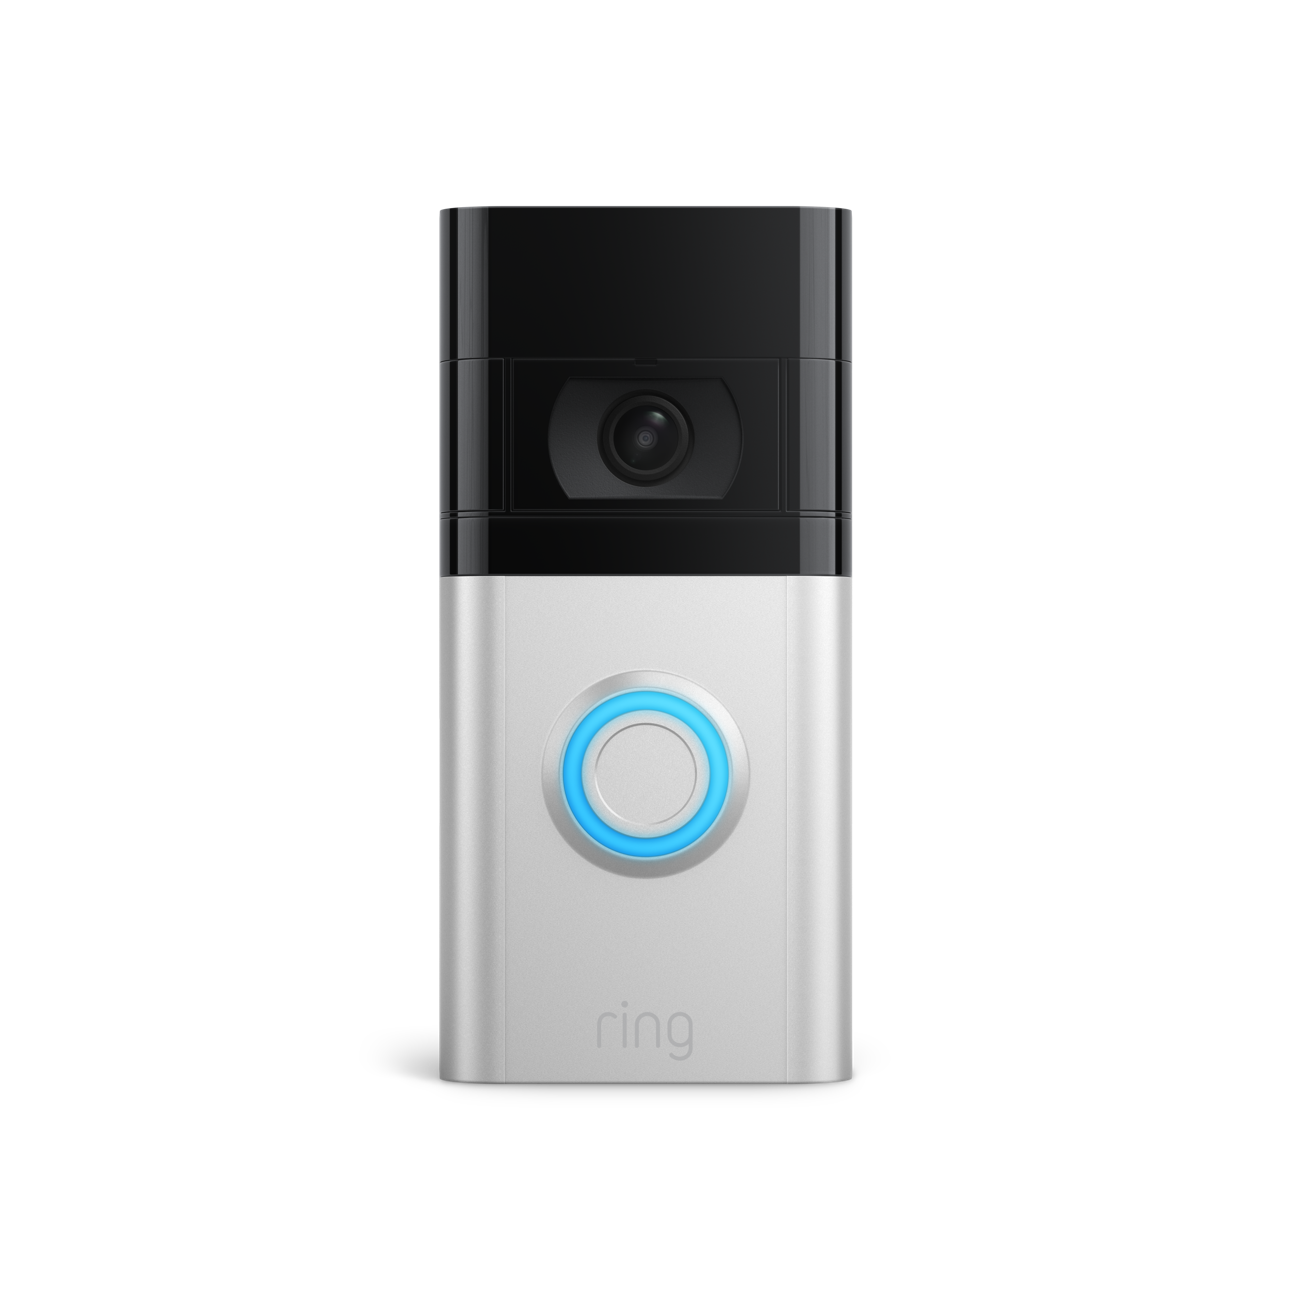 Ring Smart Video Doorbell 3 Plus with Built-in Wi-Fi & Camera - MISSING ACCESSORIES